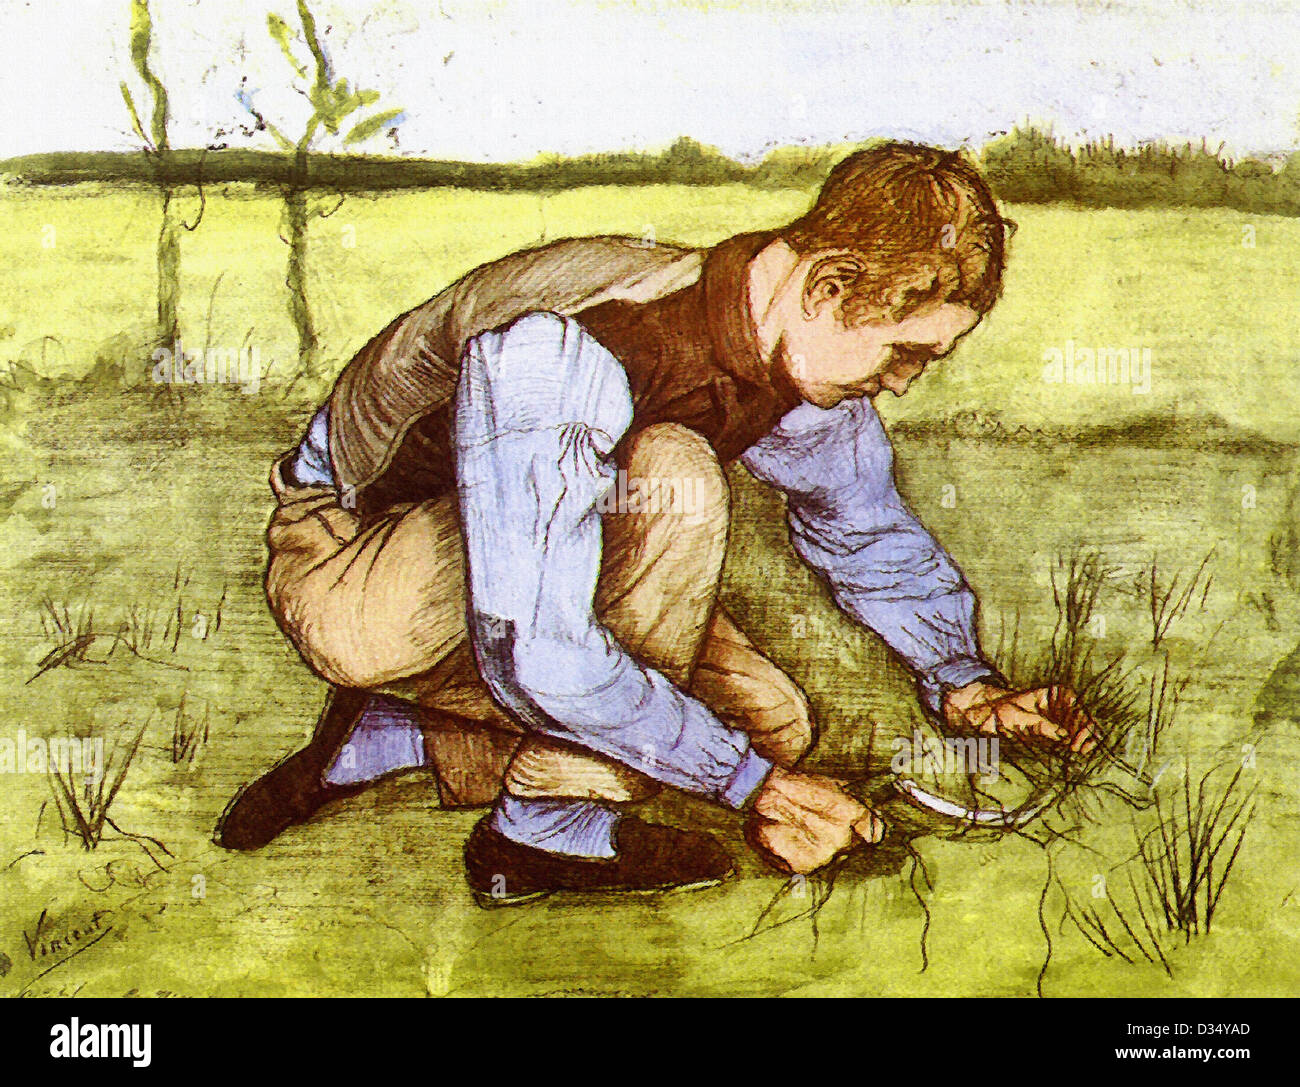 Vincent van Gogh, Boy Cutting Grass with a Sickle. 1881. Post-Impressionism. Oil on canvas. Rijksmuseum Kröller-Müller, Otterlo, Stock Photo